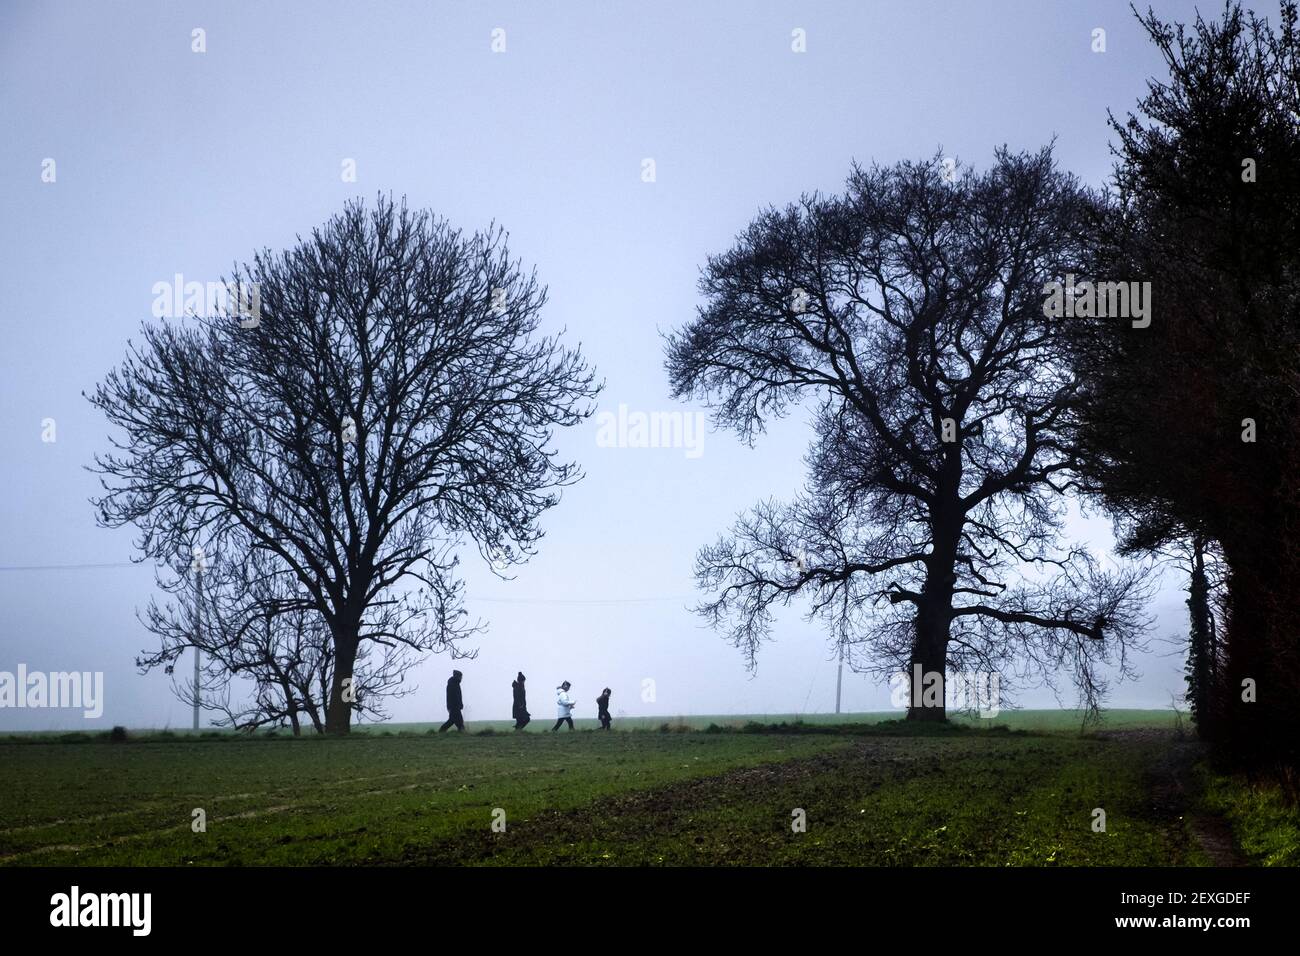 A family walk on a dull winter's day in the country, Suffolk, UK. Stock Photo